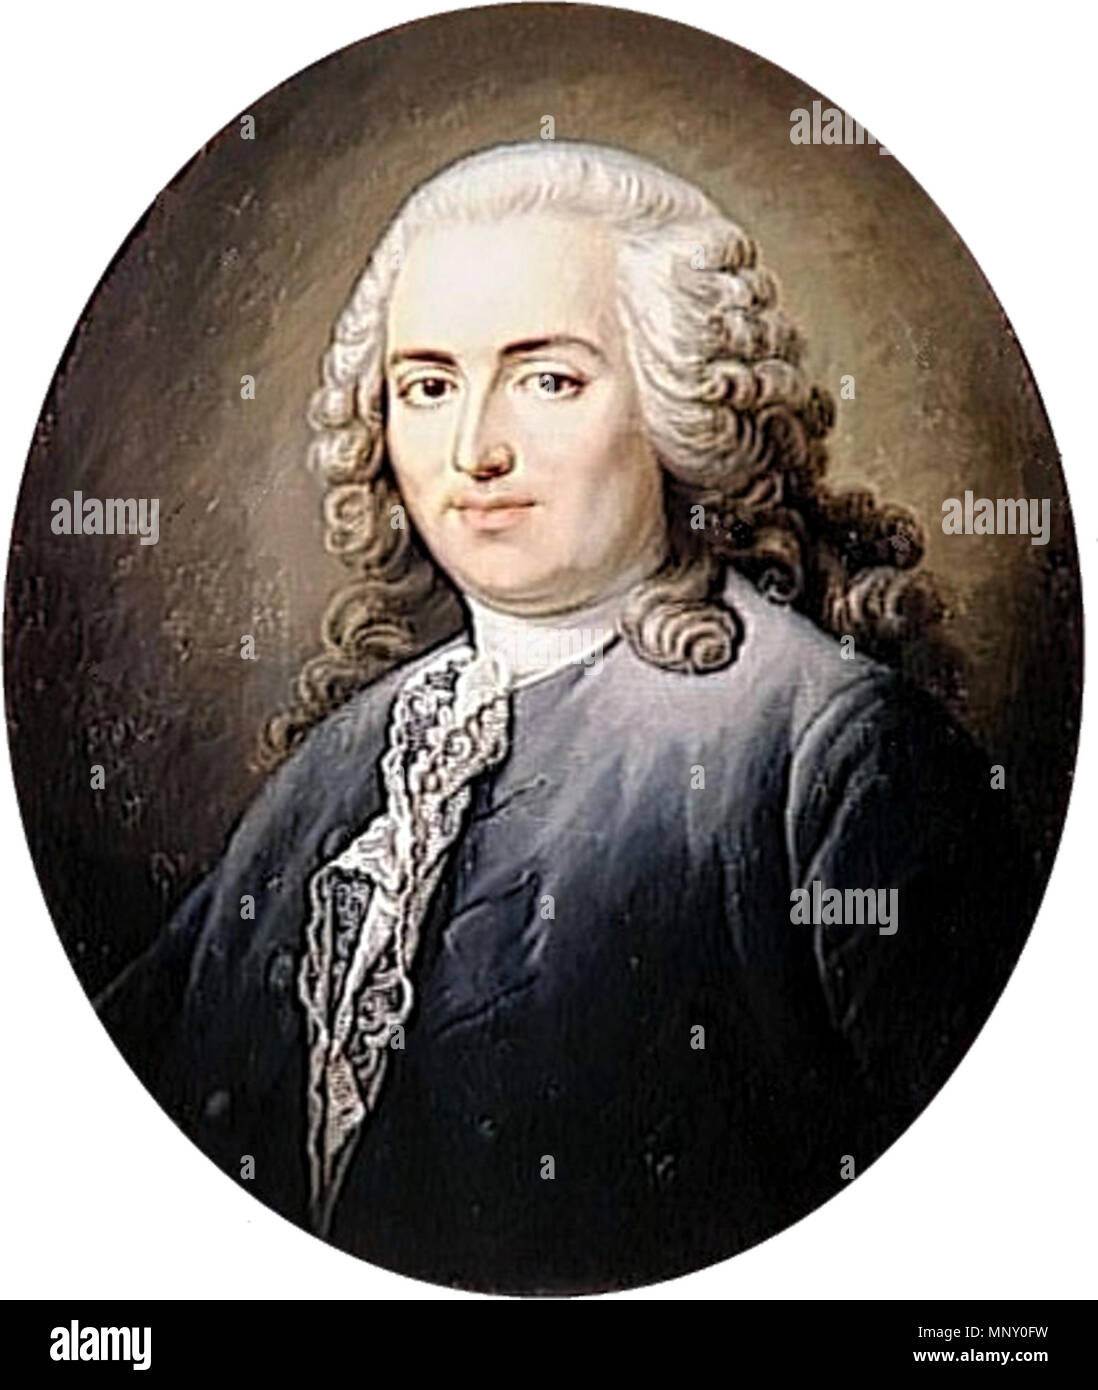 . English: Portrait of Turgot, attributed to Antoine Graincourt (1748-1823); a PNG version of File:Graincourt, attributed to - Turgot.jpg . 1782. Unknown artist — attributed to Antoine Graincourt (1748-1823) 1208 Turgot Stock Photo